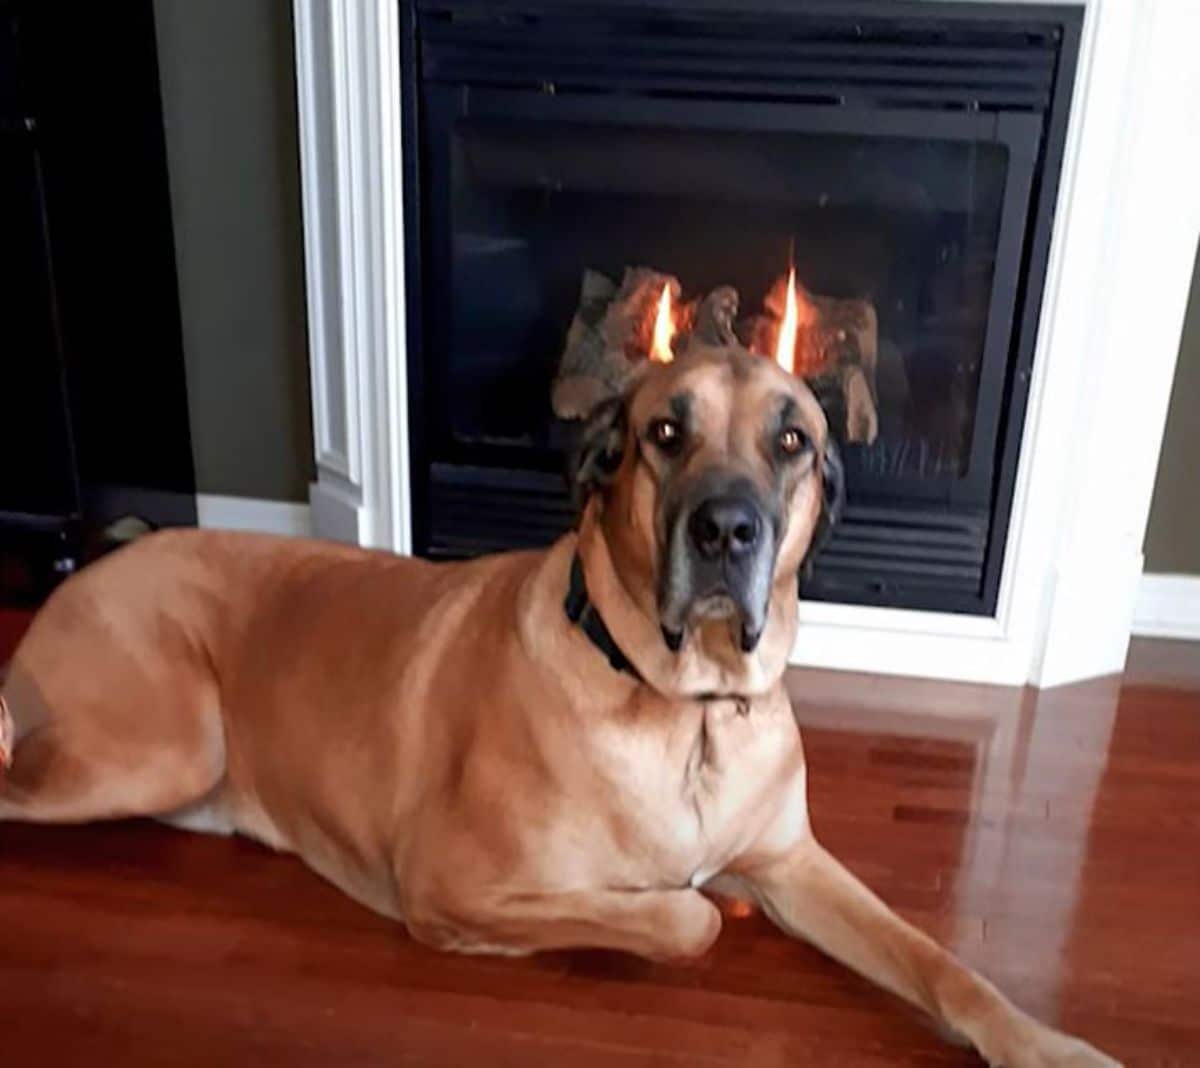 large brown demon dog with fiery horns from the fireplace behind